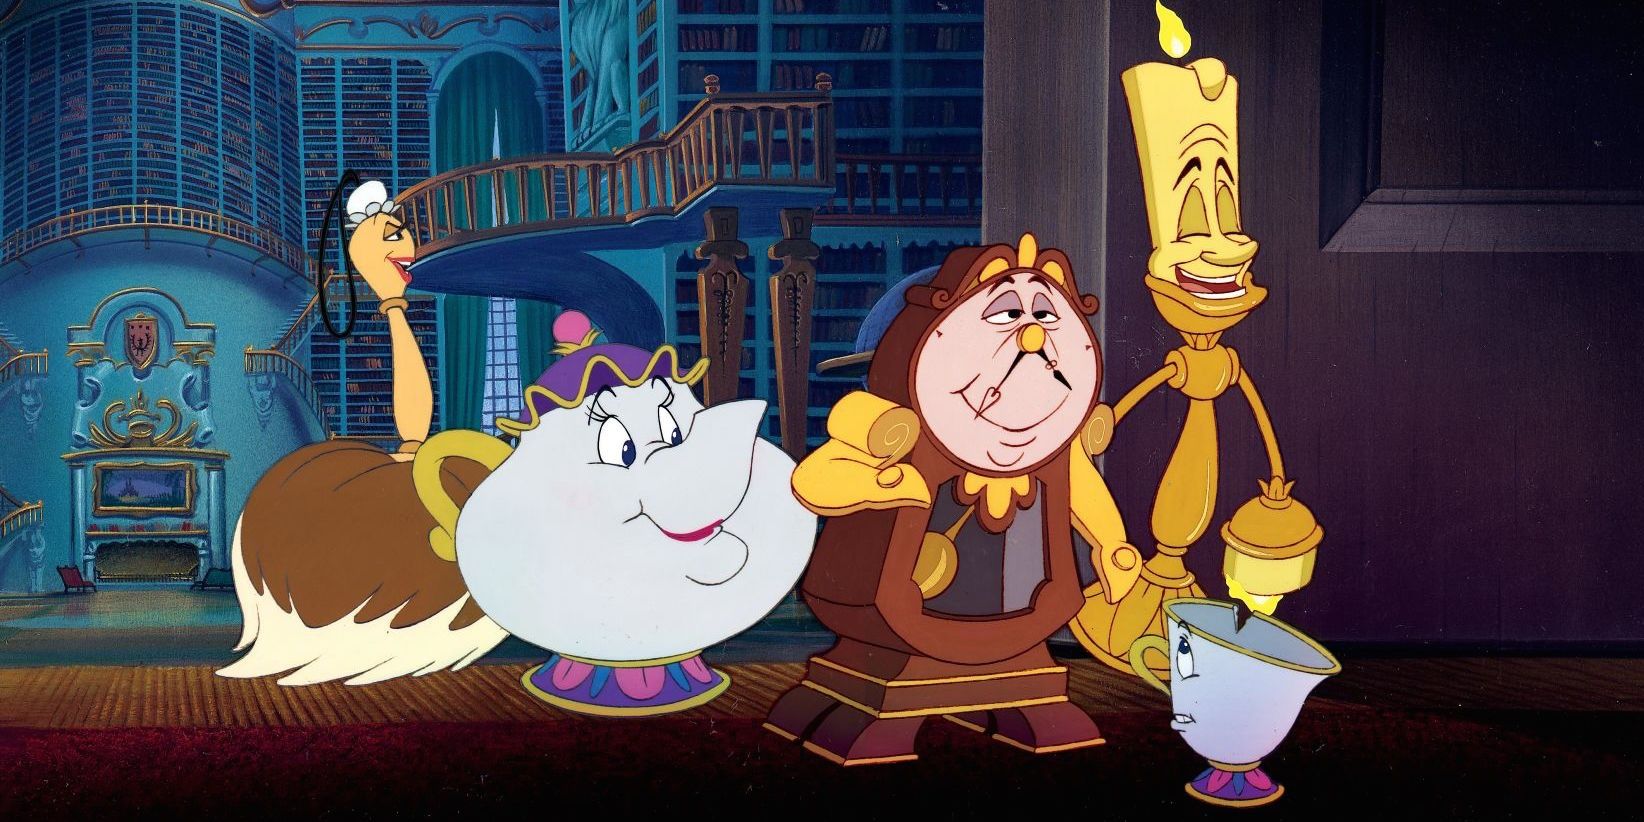 Cogsworth, Mrs. Potts, Lumiere, and Chip smiling together in Belle's Magical World